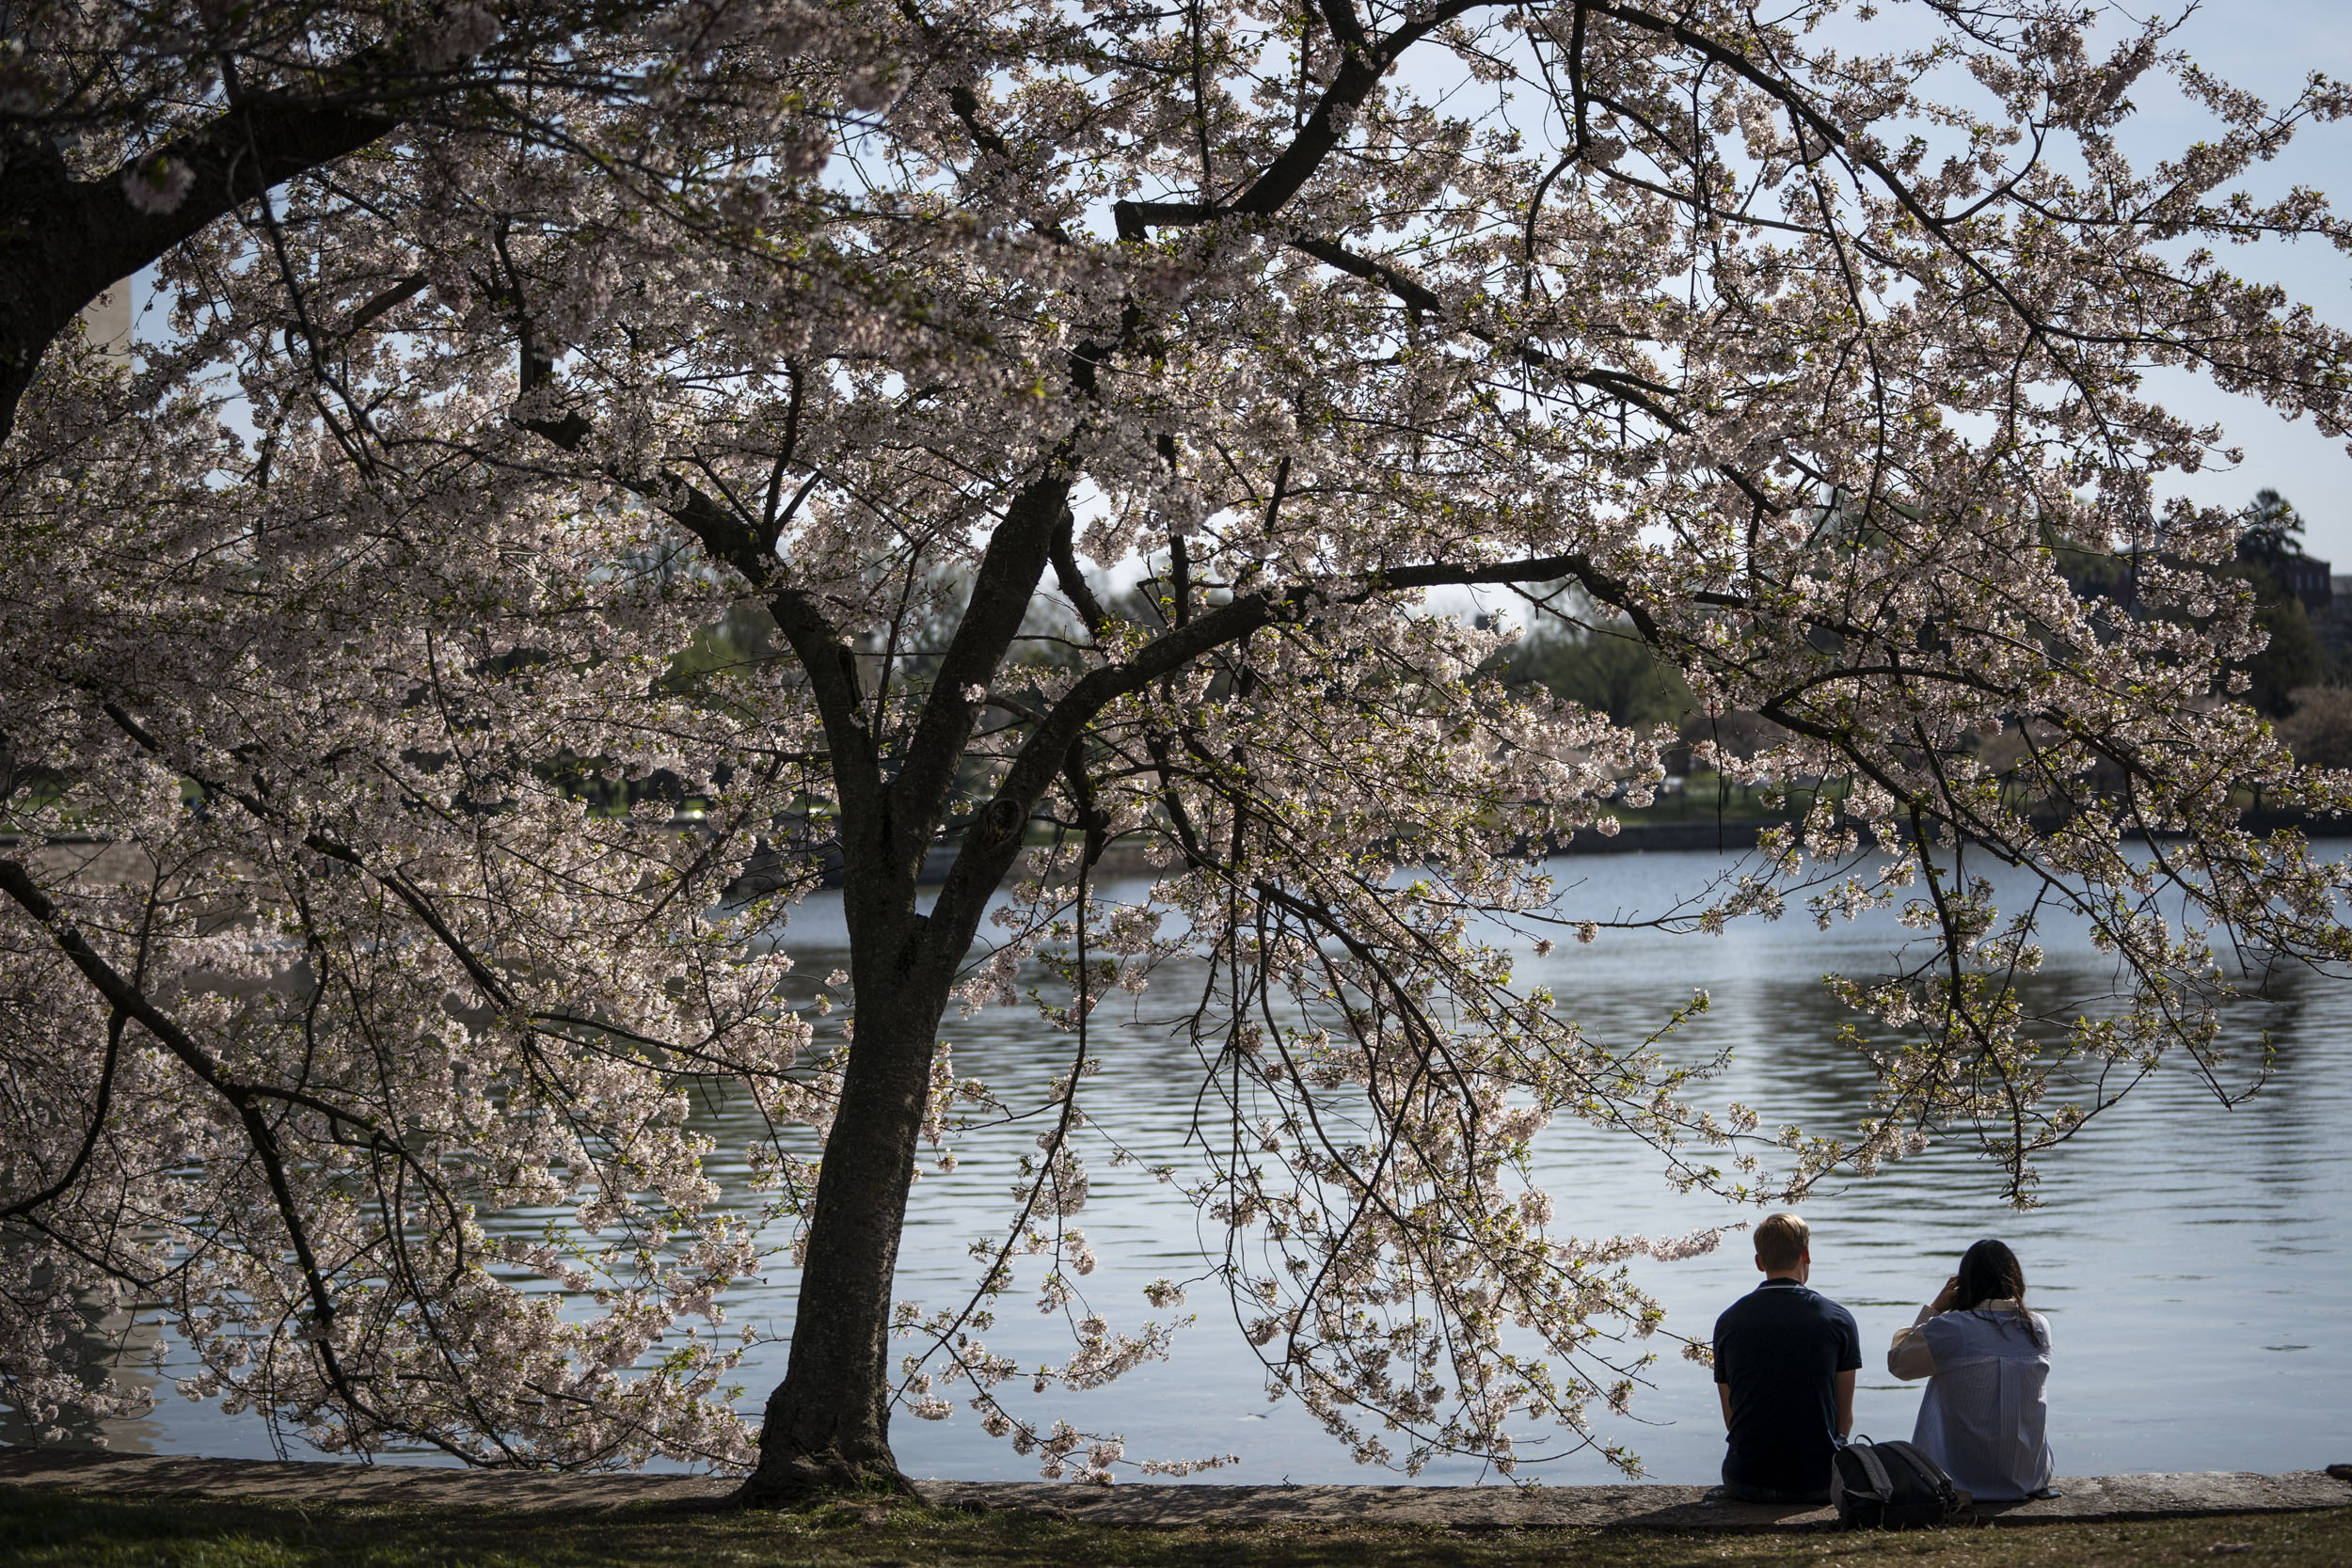 WASHINGTON, DC - APRIL 5: People sit under blooming cherry trees along the Tidal Basin on April 5, 2021 in Washington, DC. The iconic cherry blossoms reached their peak bloom on March 28 this season, earlier than expected. Drew Angerer/Getty Images/AFP (Photo by Drew Angerer / GETTY IMAGES NORTH AMERICA / Getty Images via AFP)